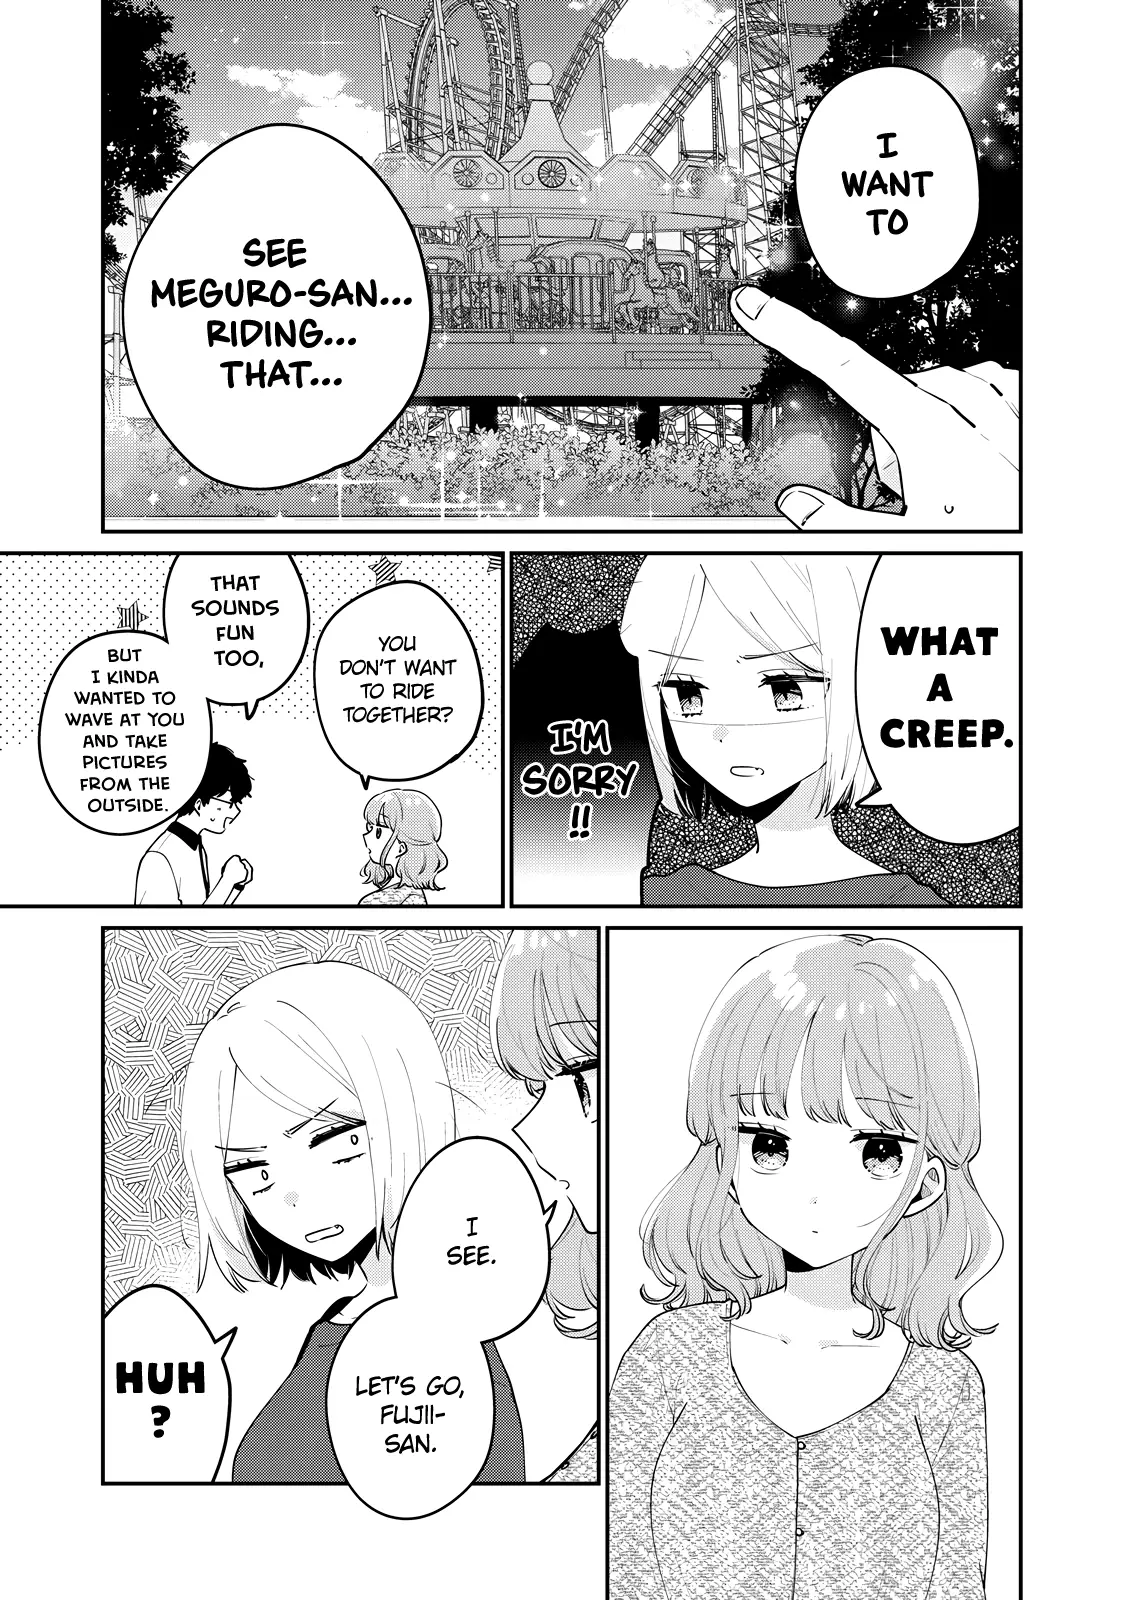 It's Not Meguro-San's First Time - 64 page 10-e3a4f53b